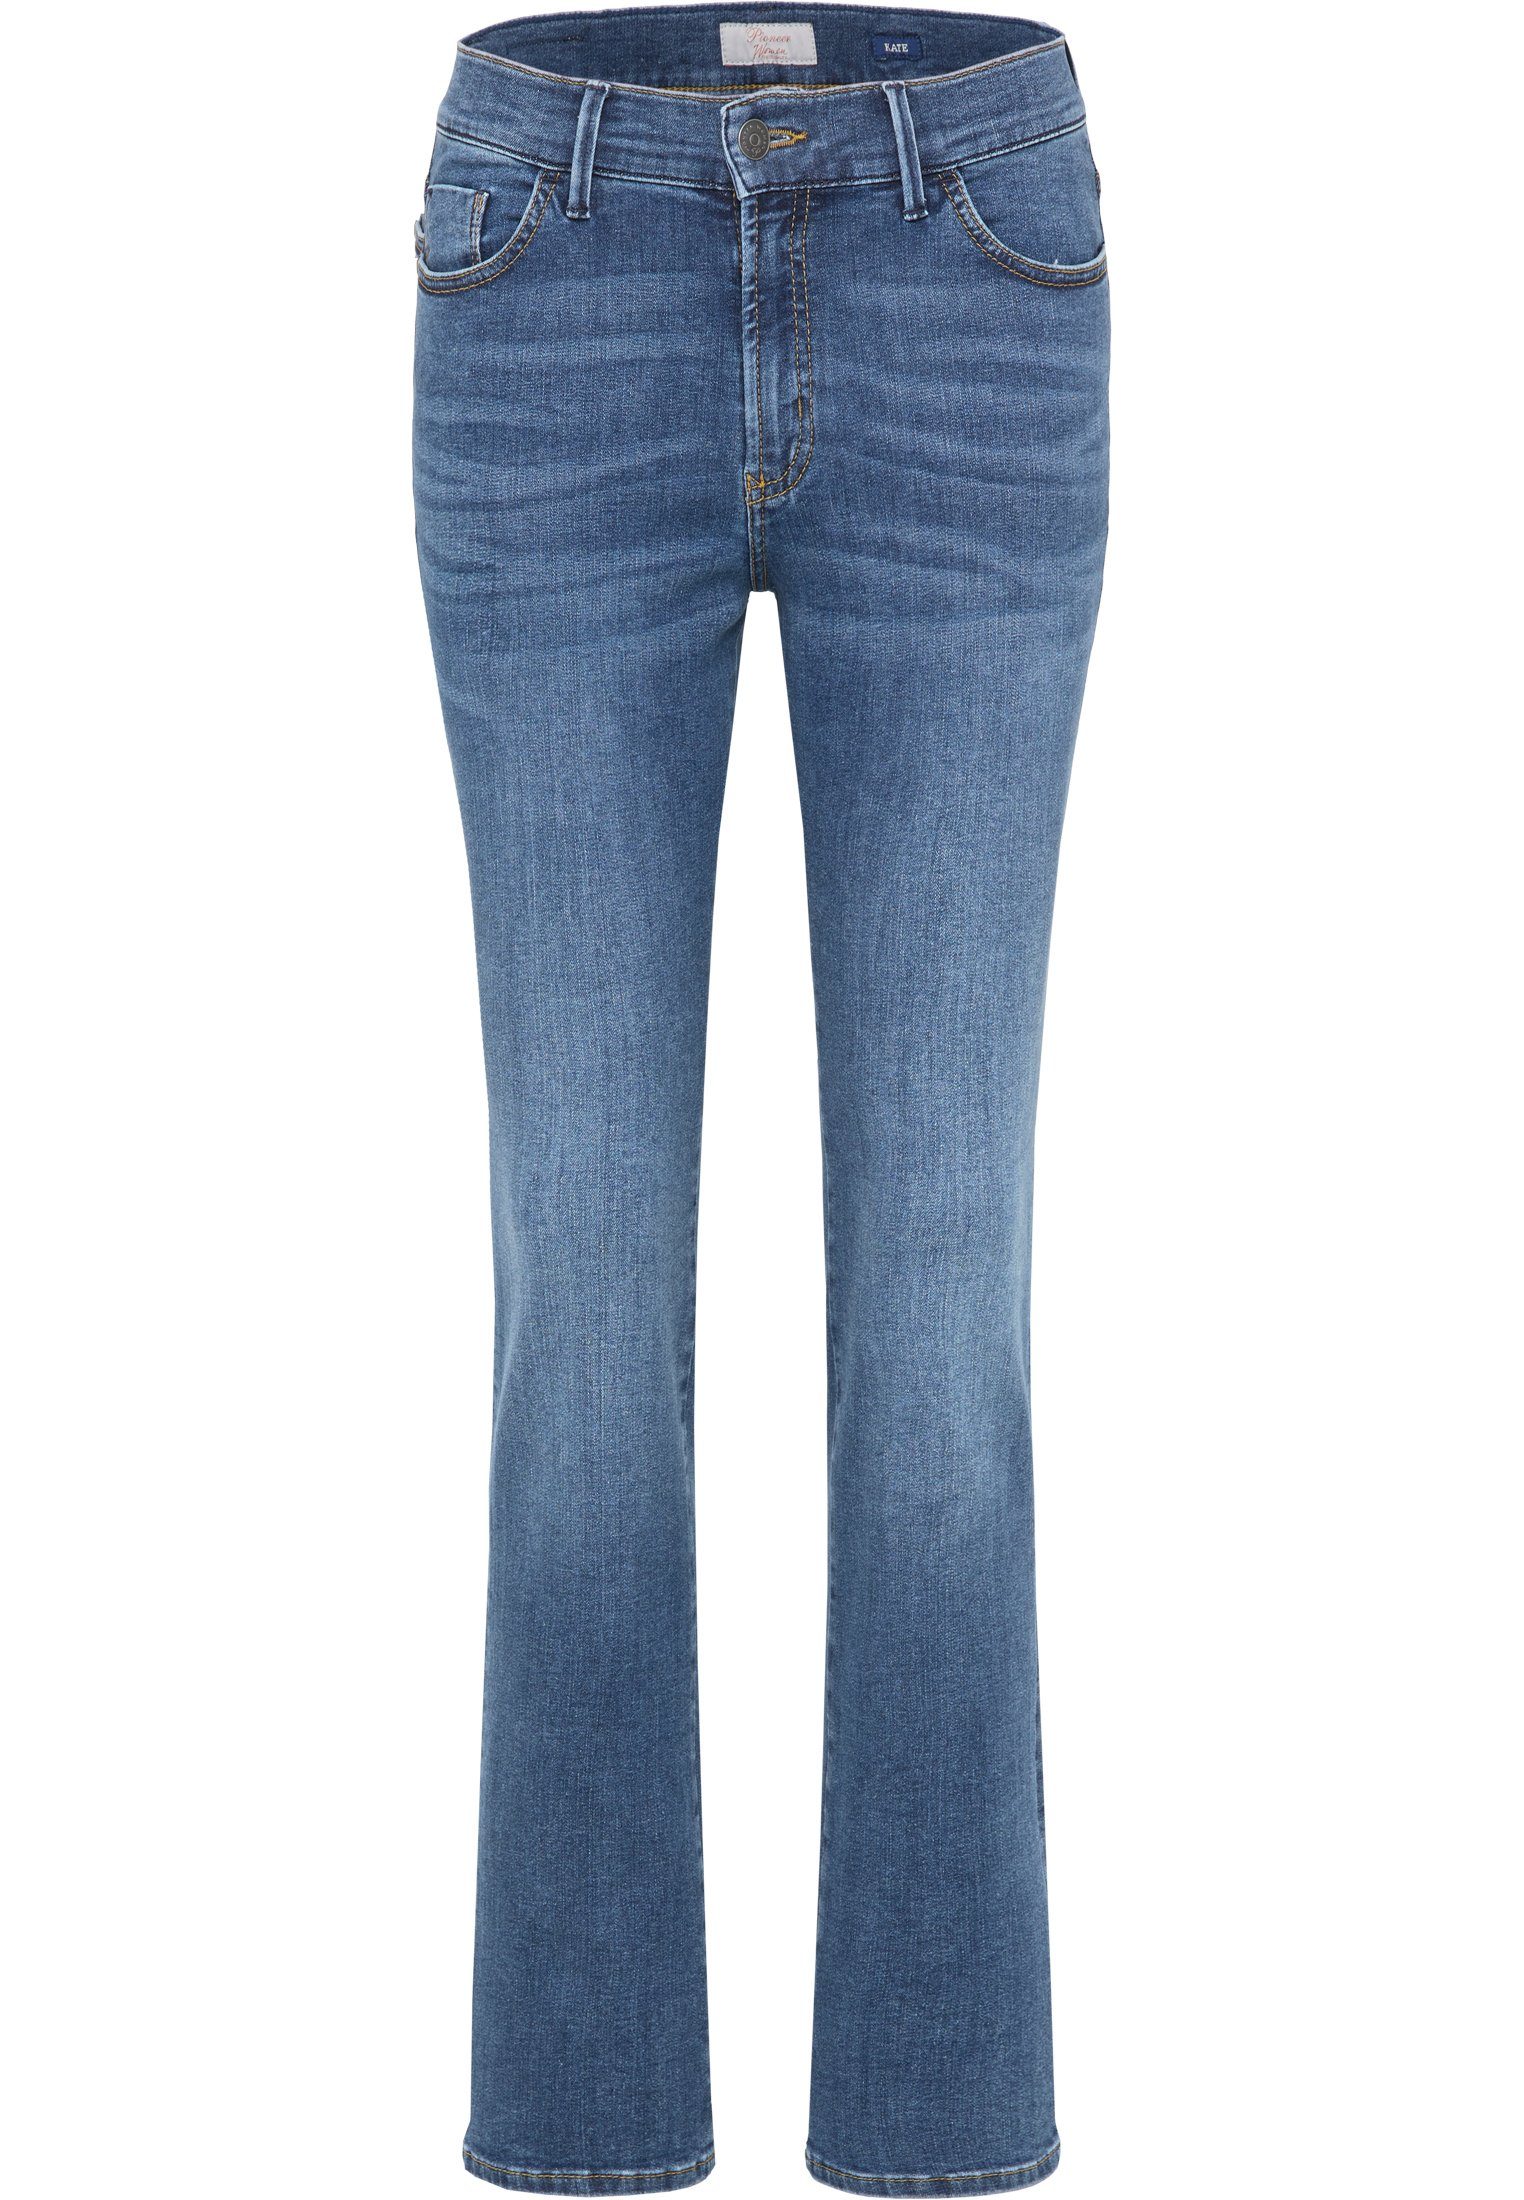 Pioneer Authentic Jeans Stretch-Jeans PIONEER KATE mid blue used 3213 4010.52 - POWERSTRETCH